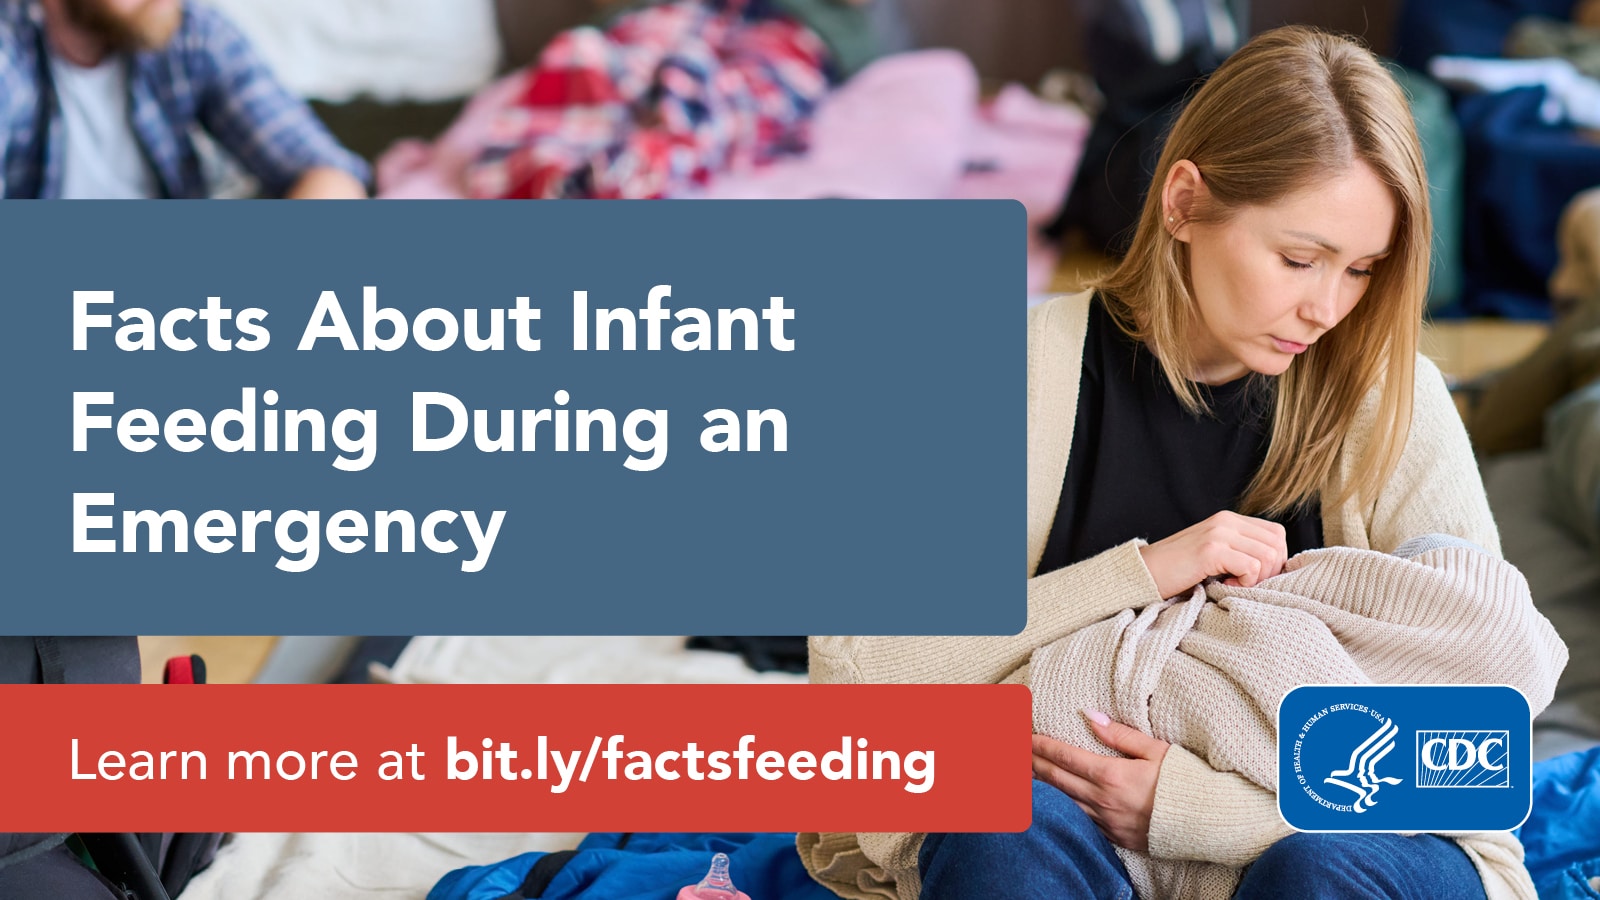 Image of a mother holding an infant with text in a box saying "Facts About Infant Feeding During an Emergency."